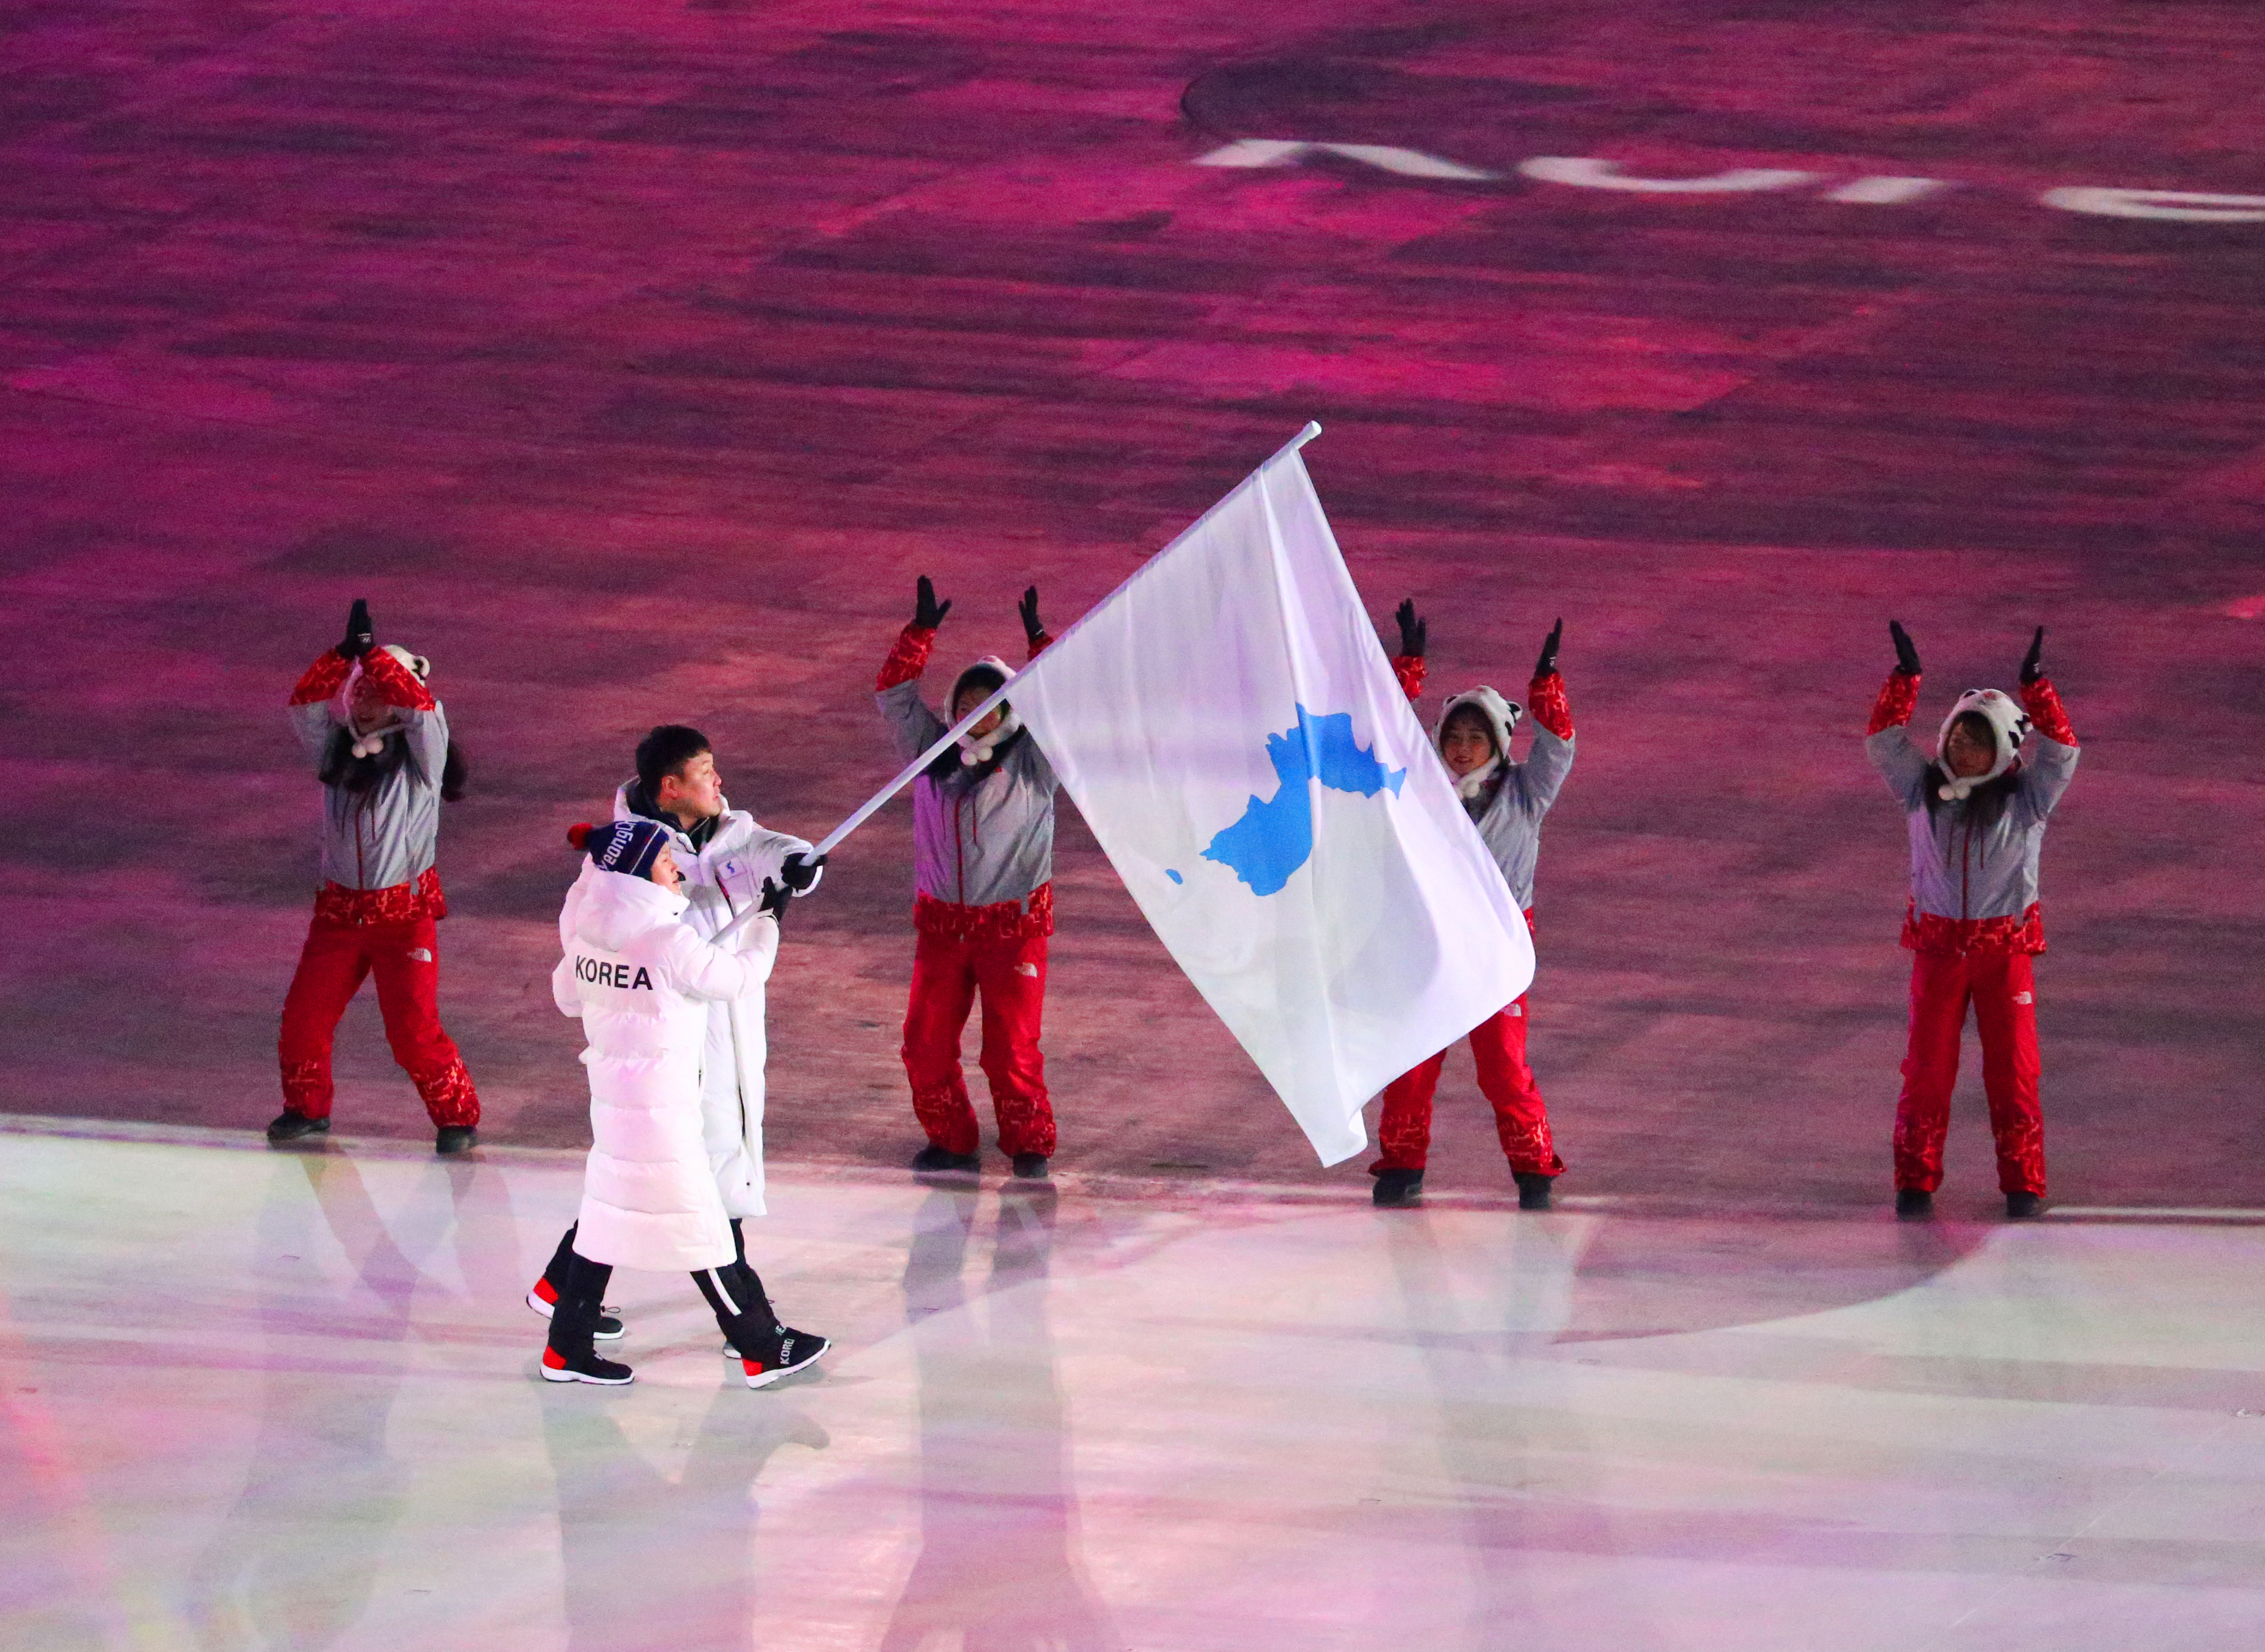 Policy Suggestions for the Incorporation of Sports in Improving Inter-Korean Relations